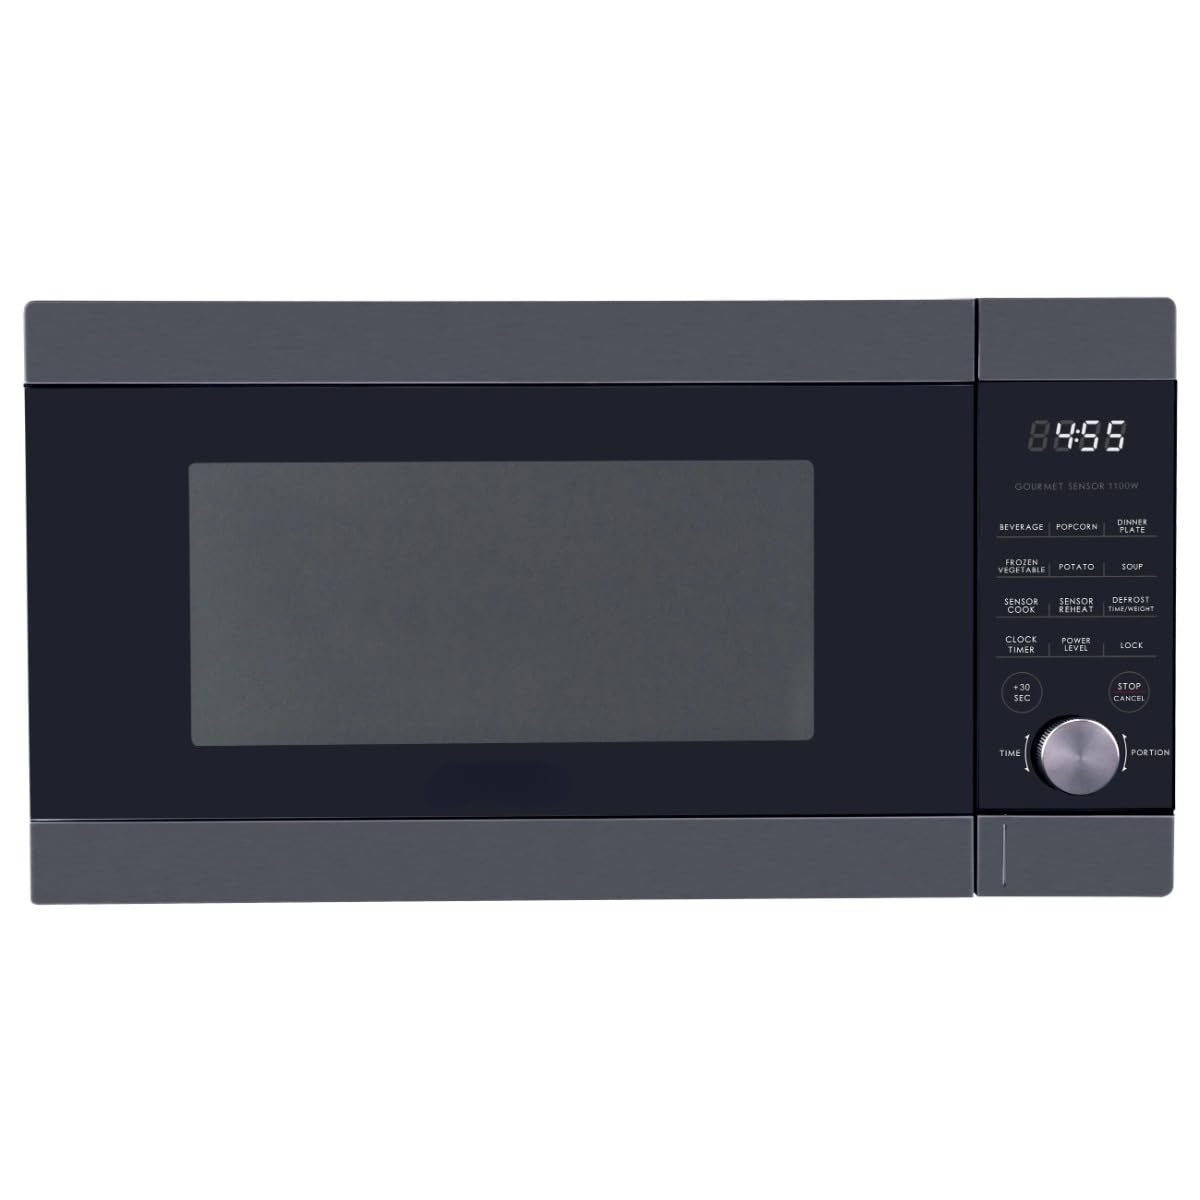 1.4 Cu ft Sensor Cooking Microwave Oven, Black Stainless Steel, New